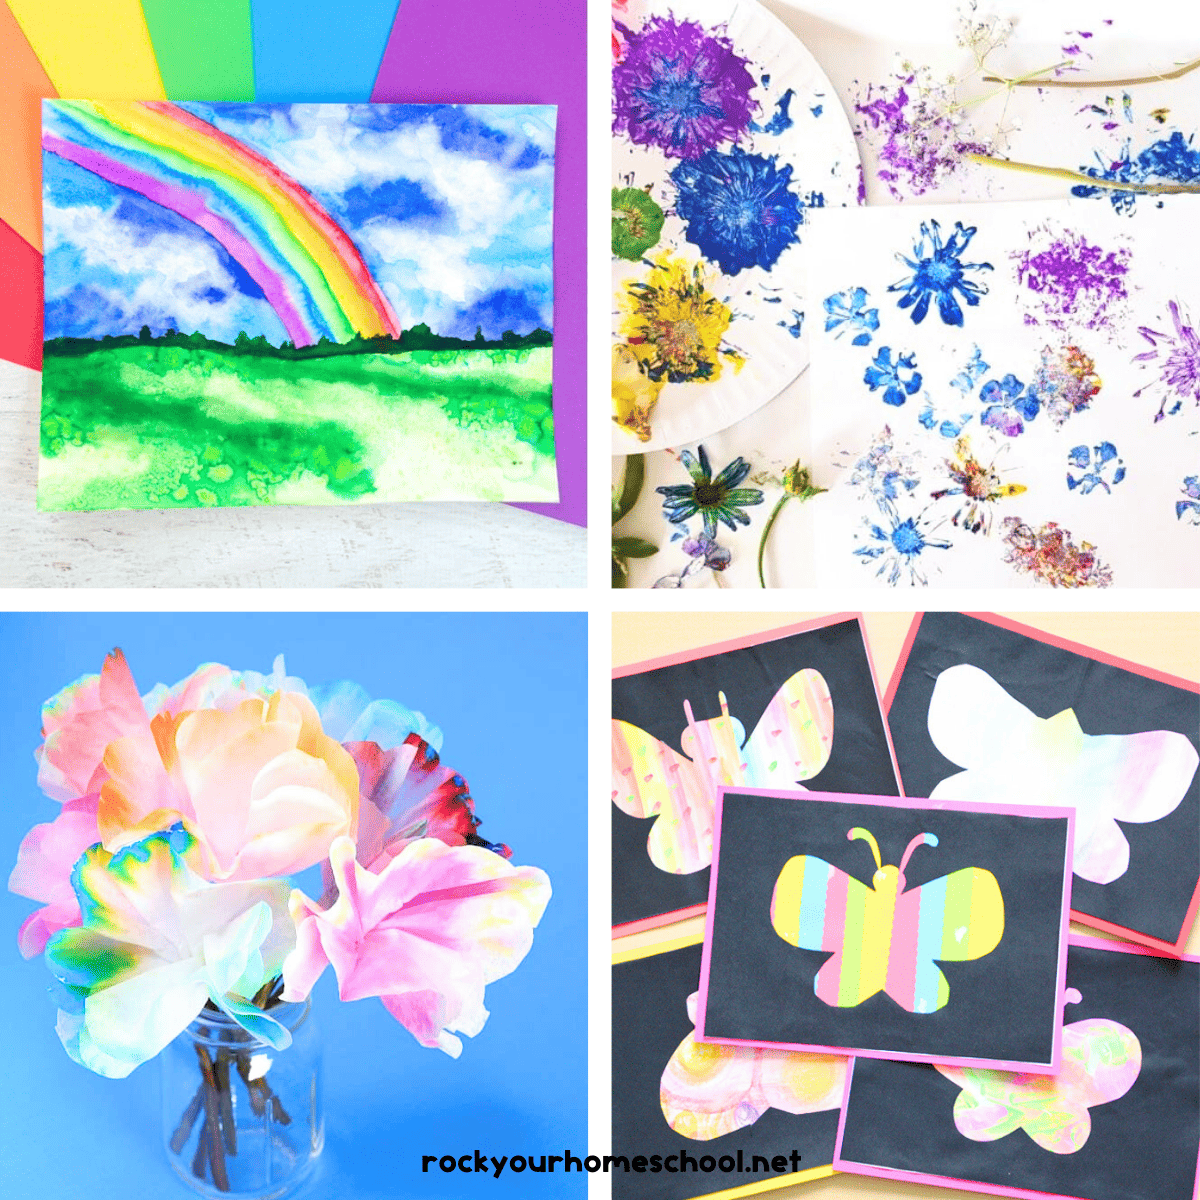 Four easy spring art ideas for kids with watercolor rainbow, flower painting, flower chromatography, and butterfly silhouettes.